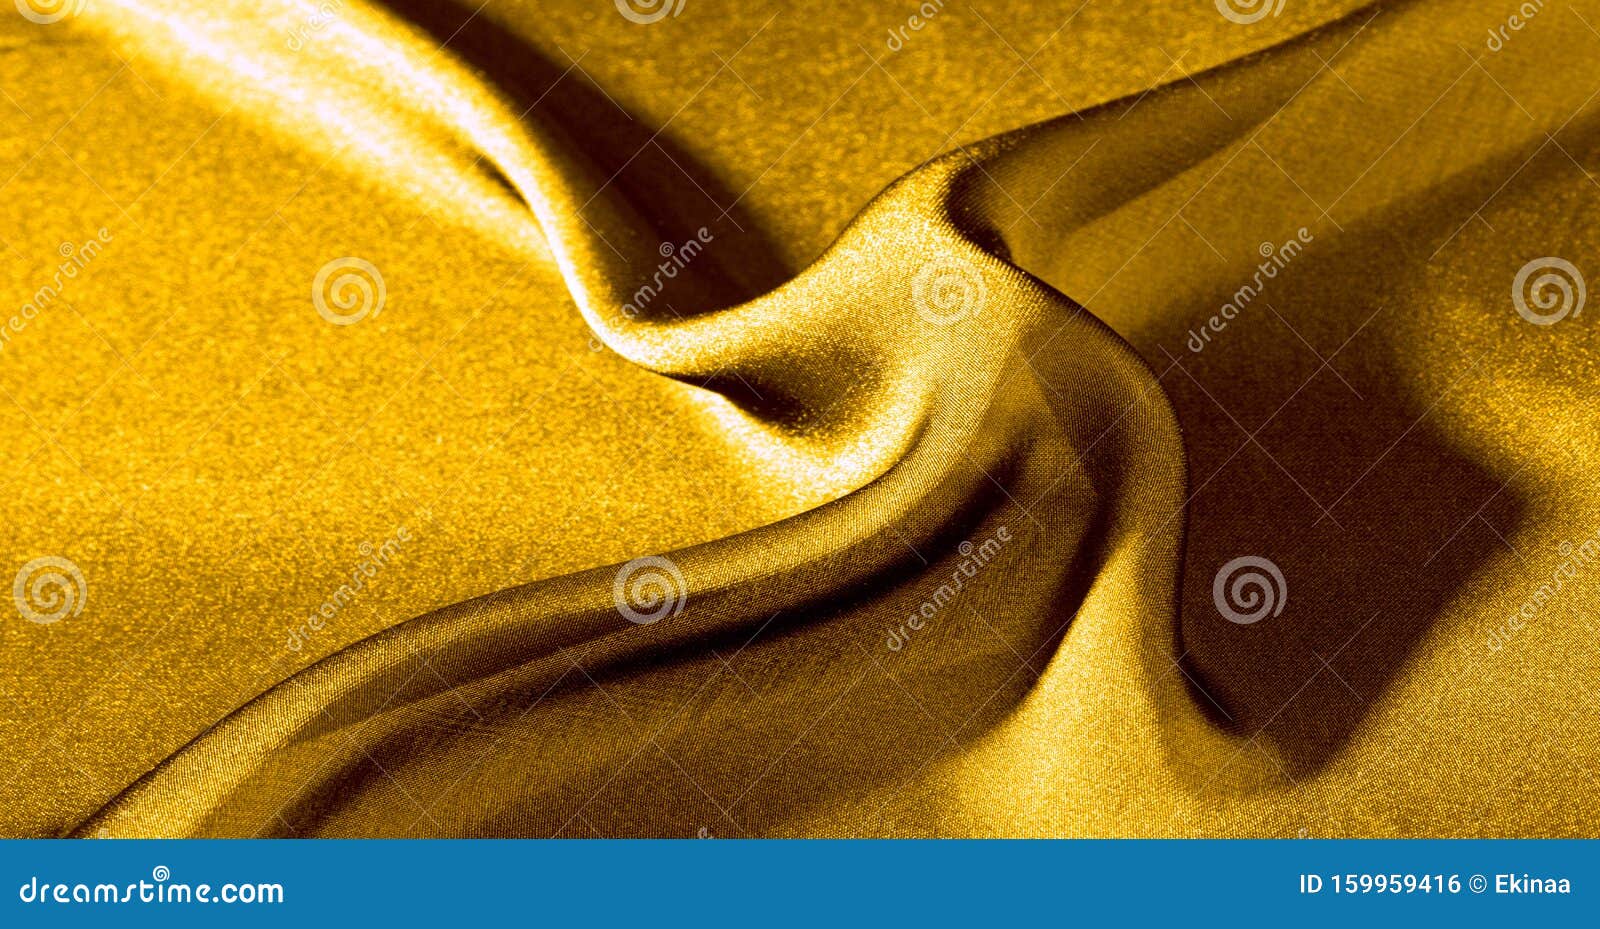 Background, Pattern, Texture, Wallpaper, Yellow Silk Fabric. Add a Touch of  Luxury To Any Design by Adding it To this Ultra-soft Stock Photo - Image of  luxury, cloth: 159959416